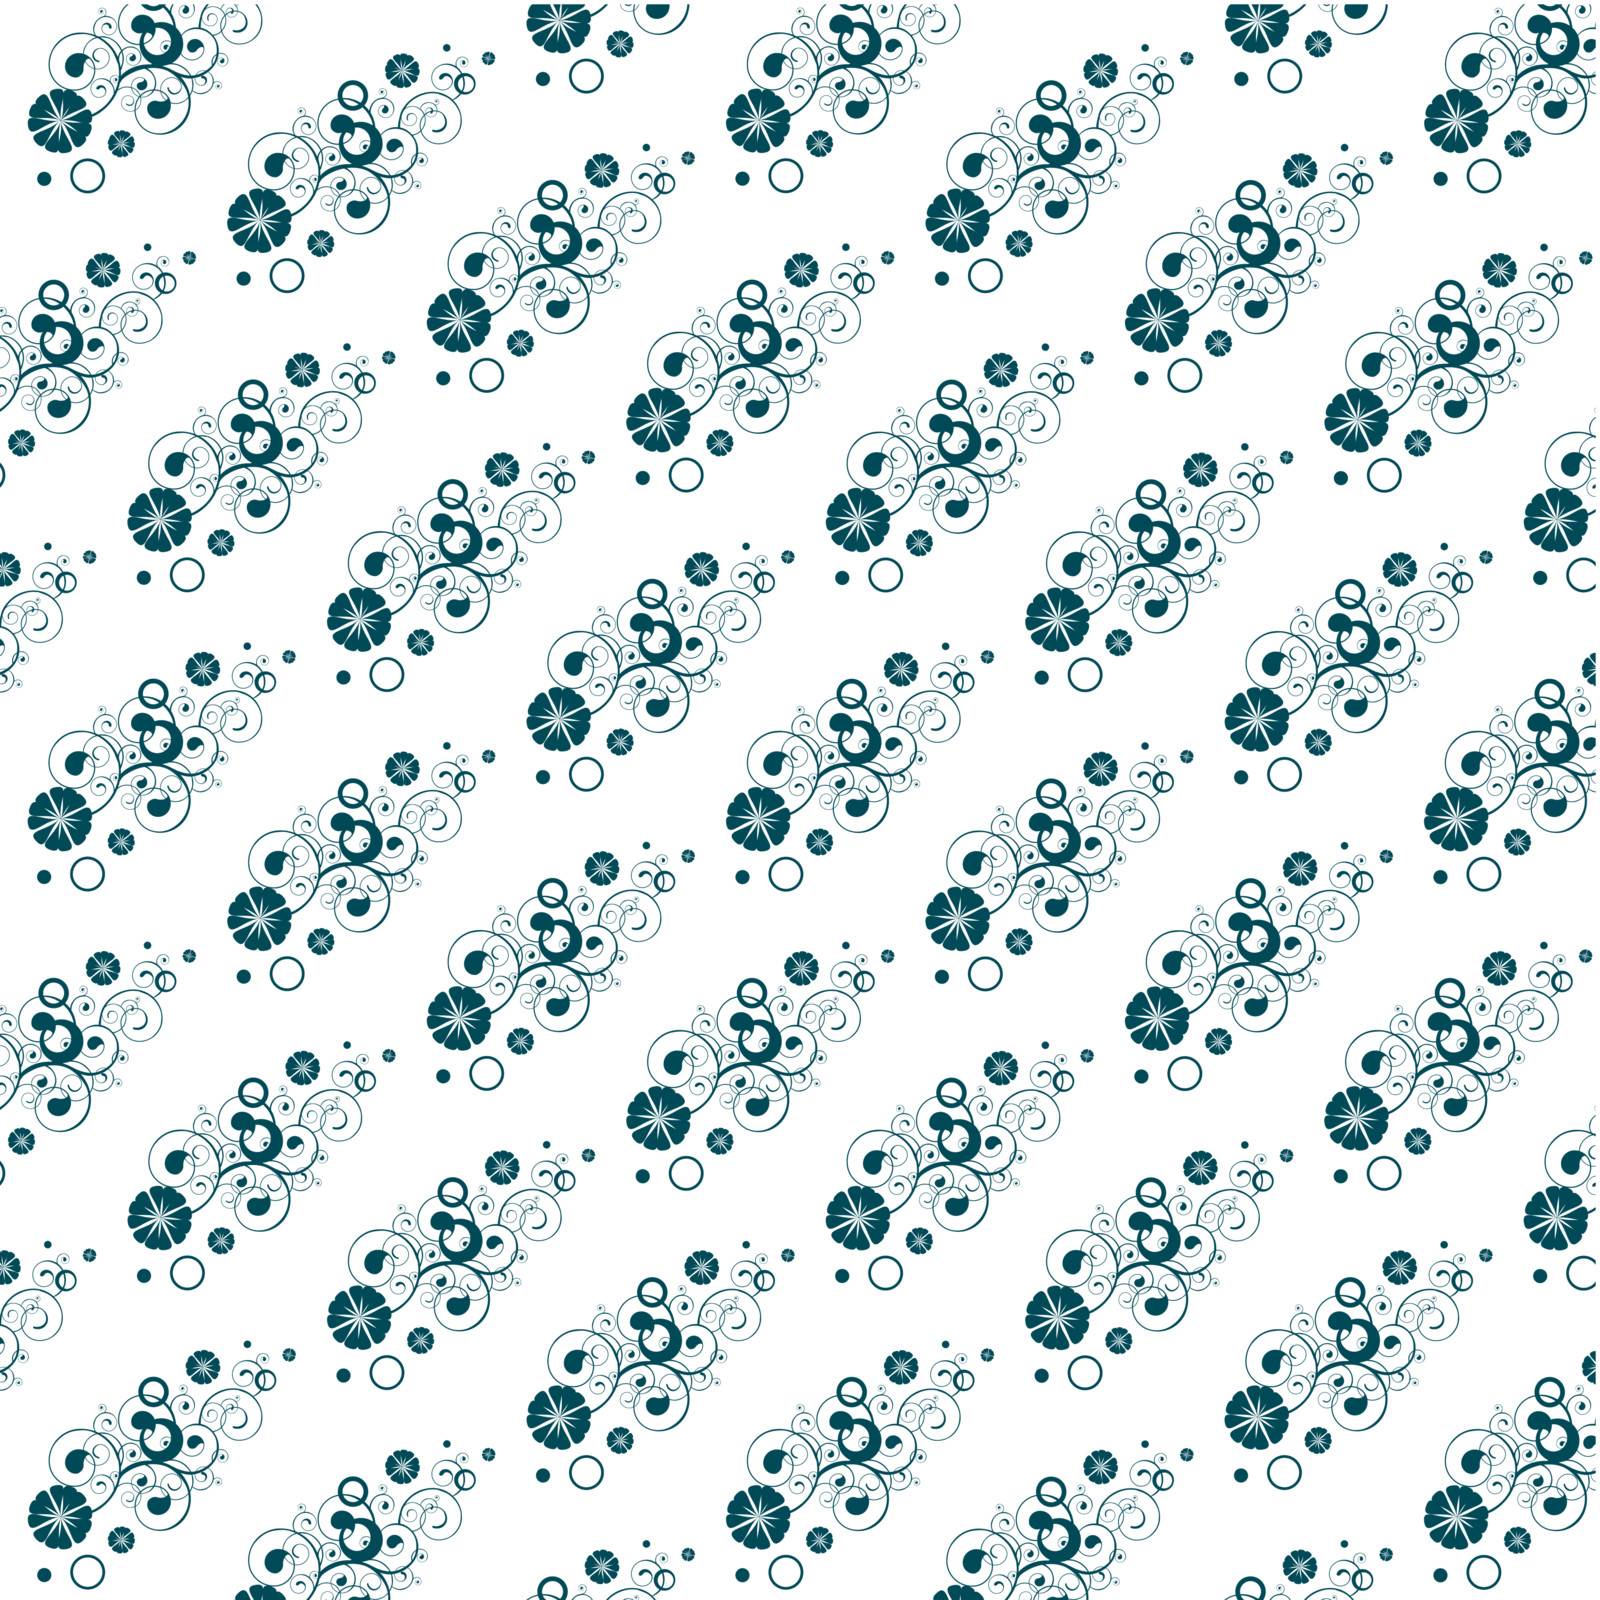 Seamless floral background in blue and white